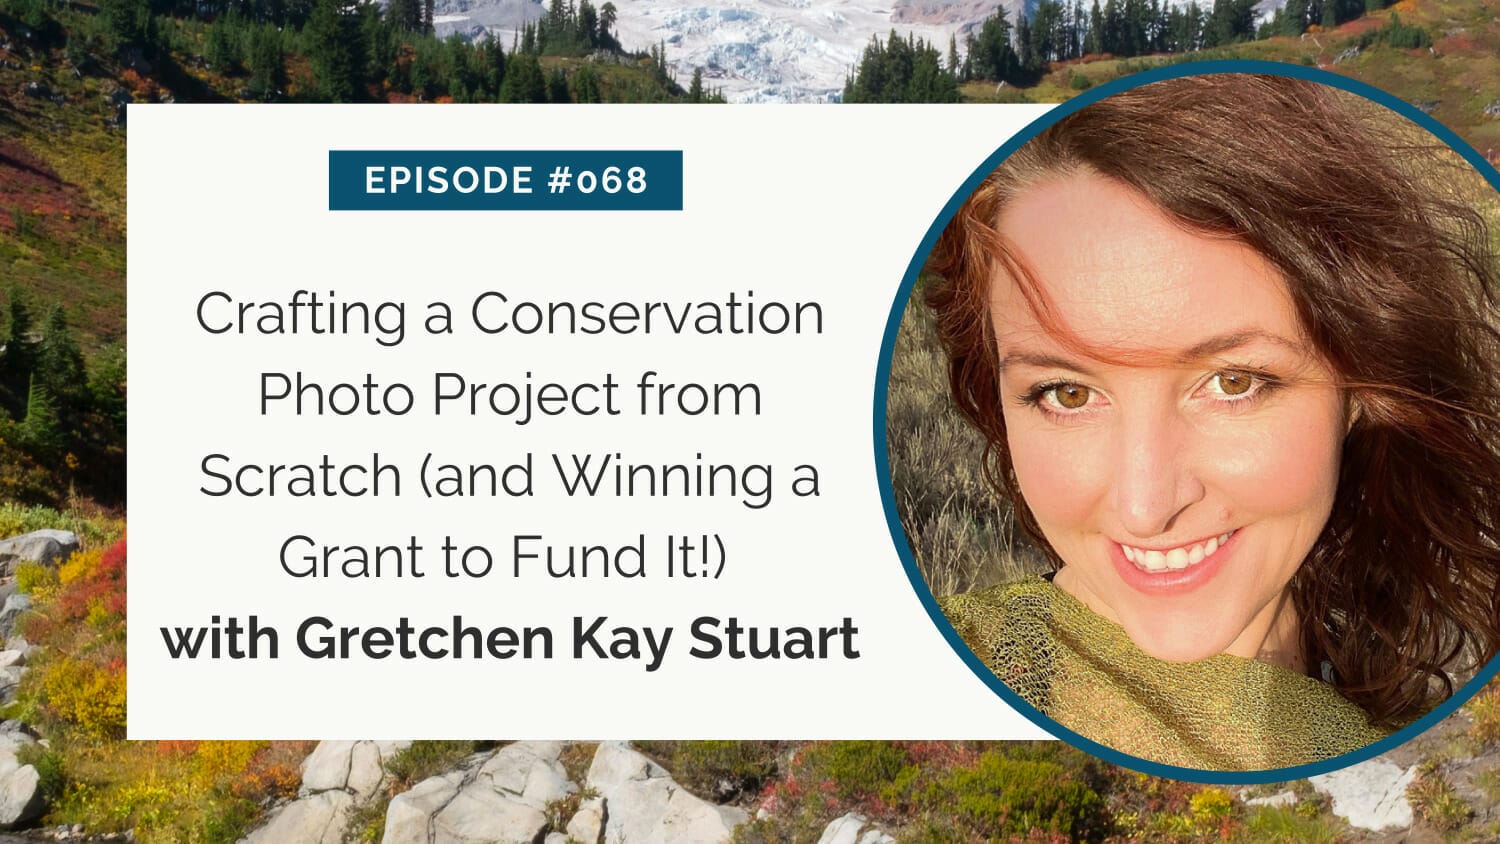 Person smiling with text about crafting a conservation photo project and winning a grant, episode #068 with gretchen kay stuart.